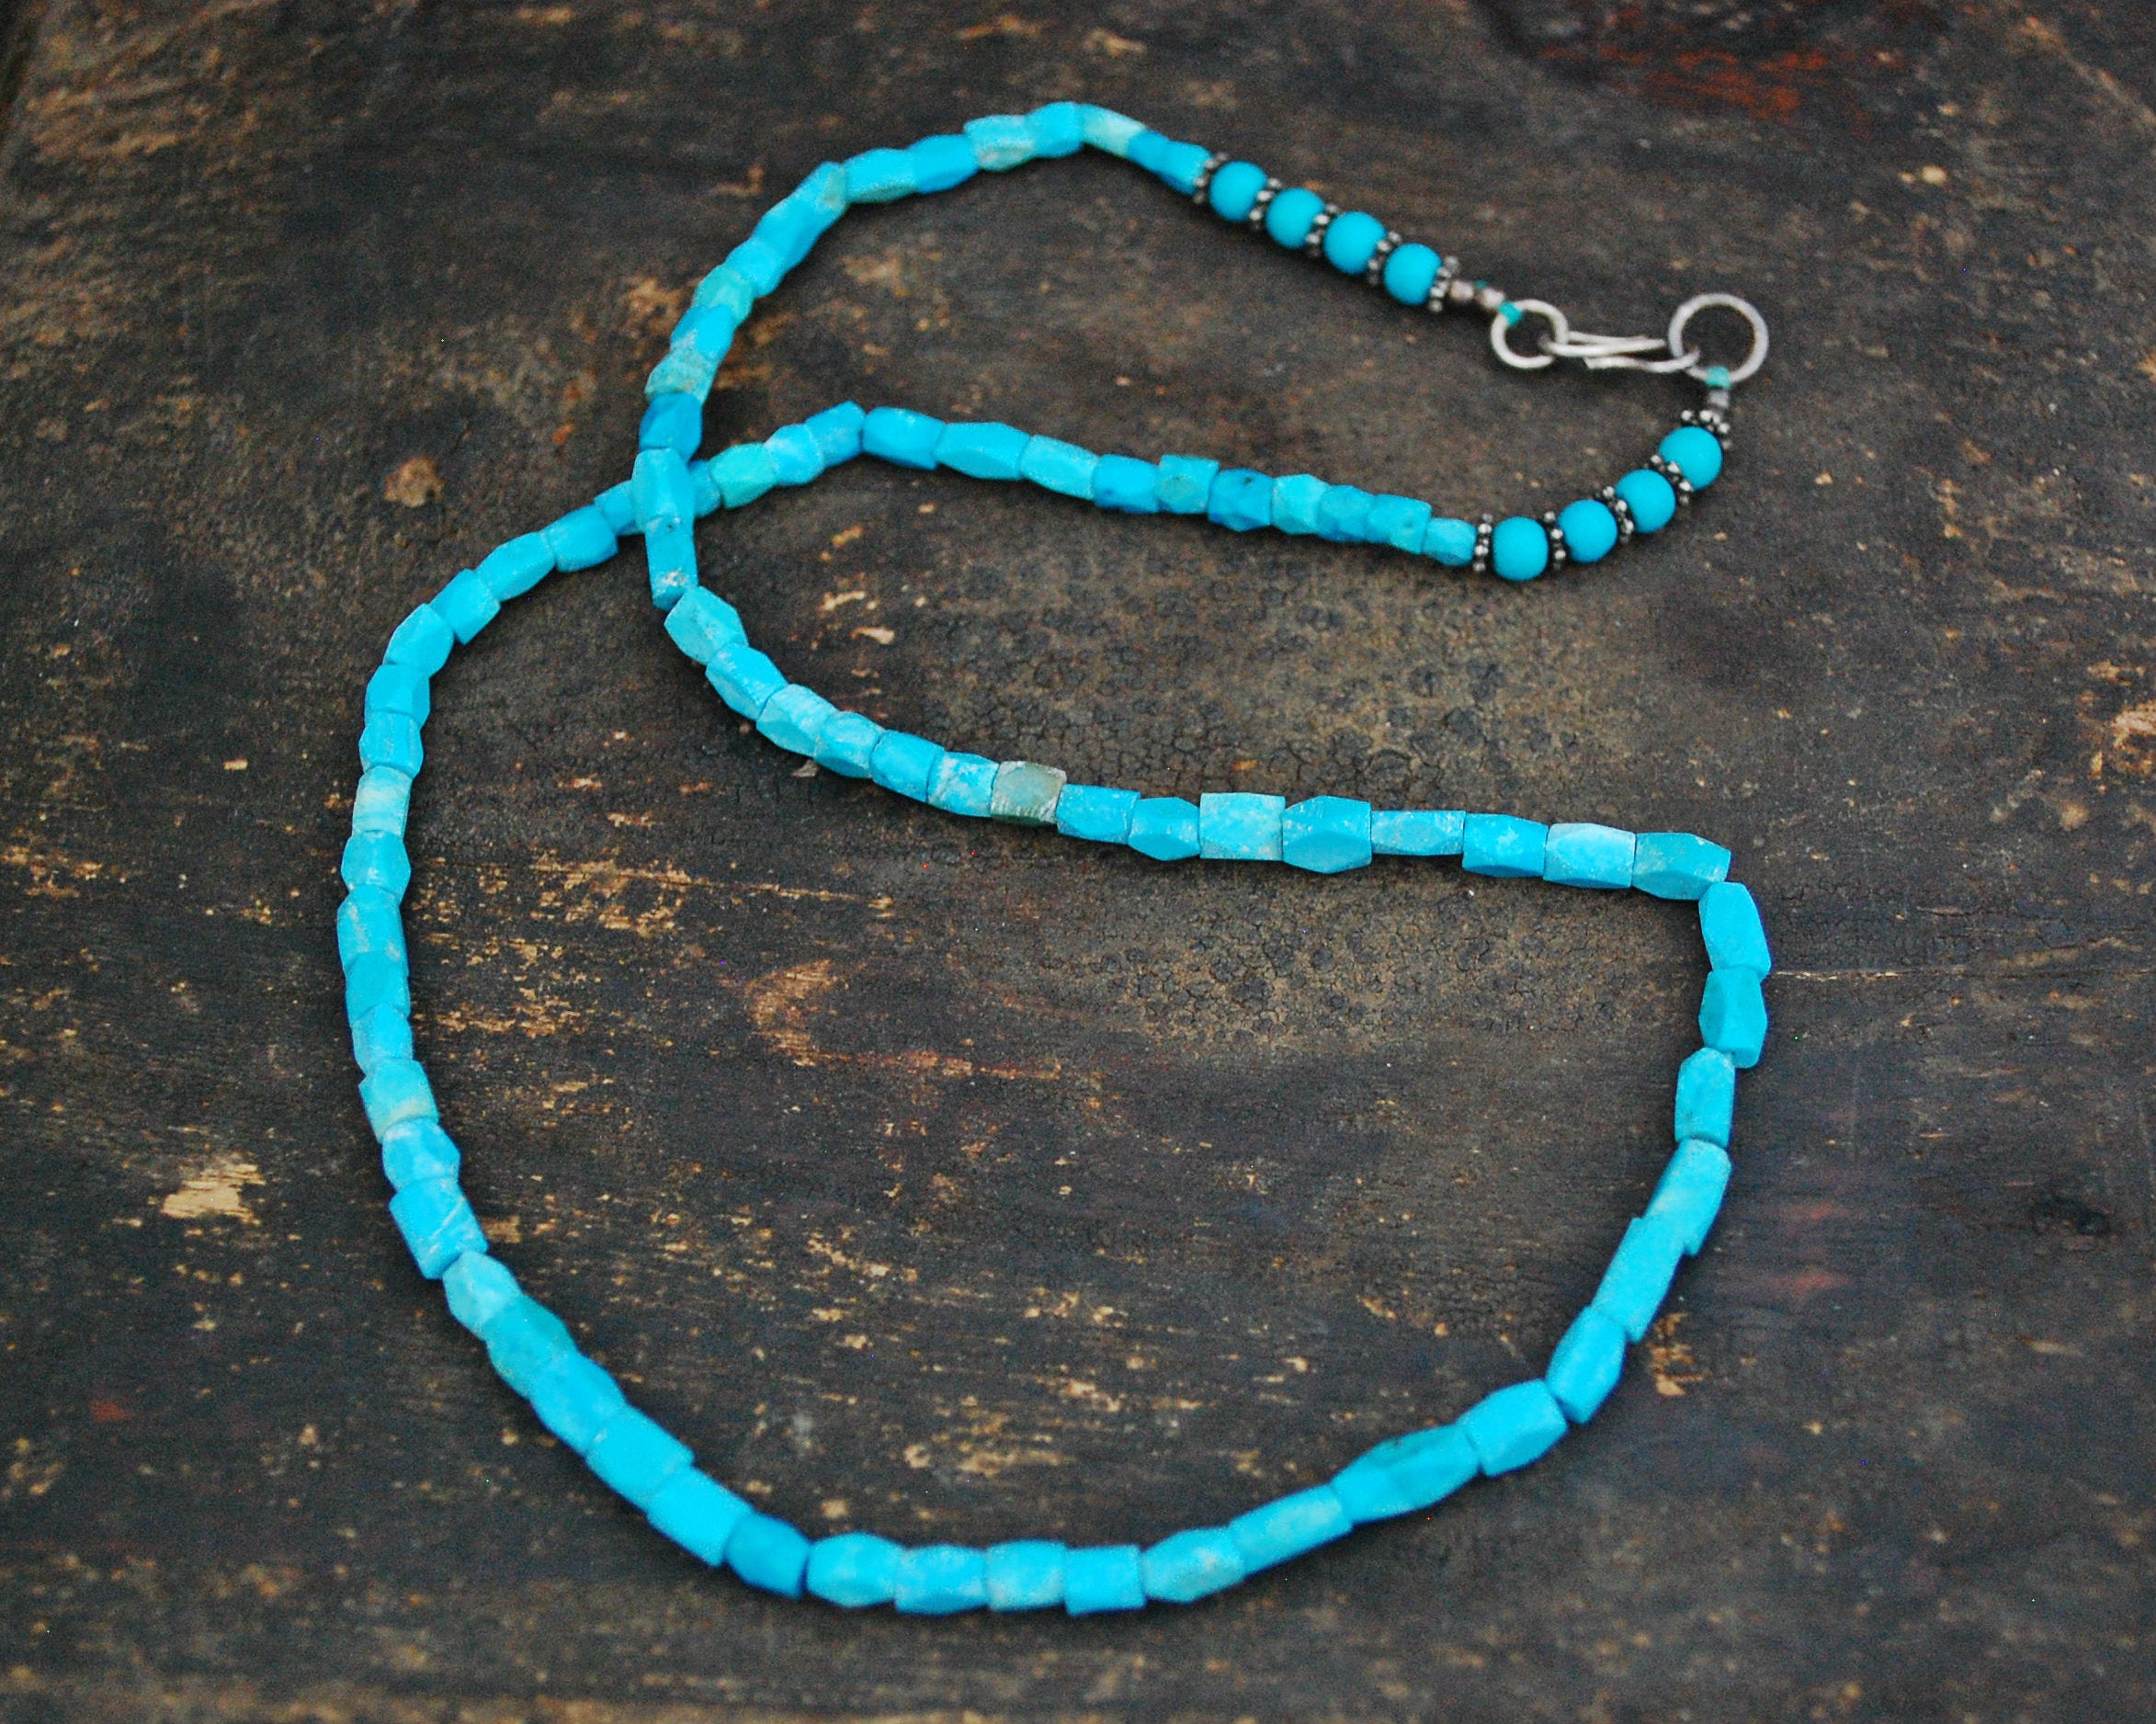 Turquoise Necklace from Afghanistan